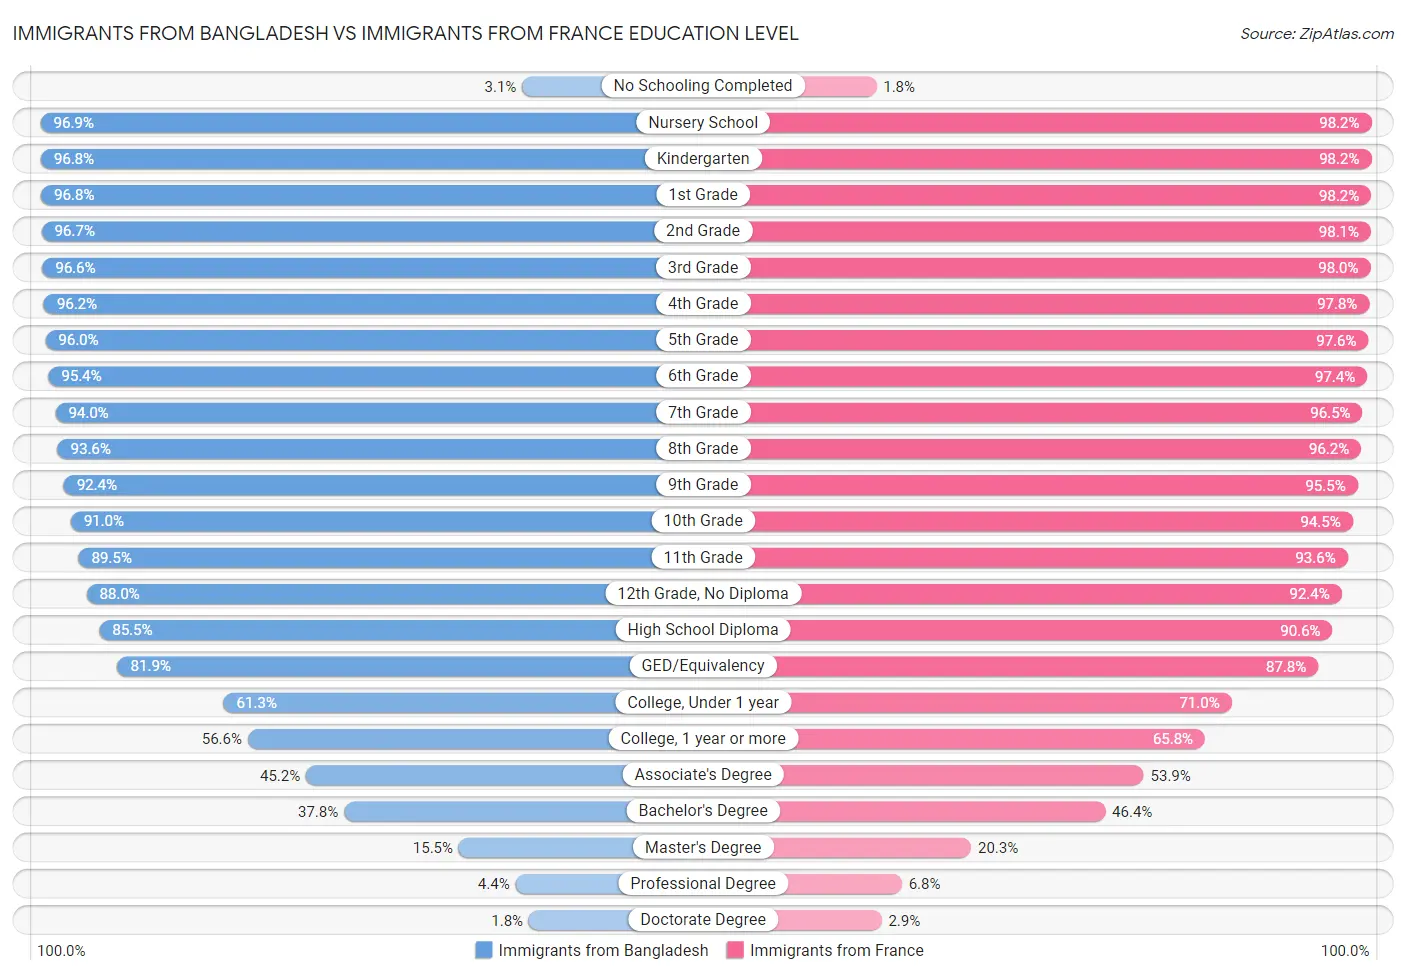 Immigrants from Bangladesh vs Immigrants from France Education Level